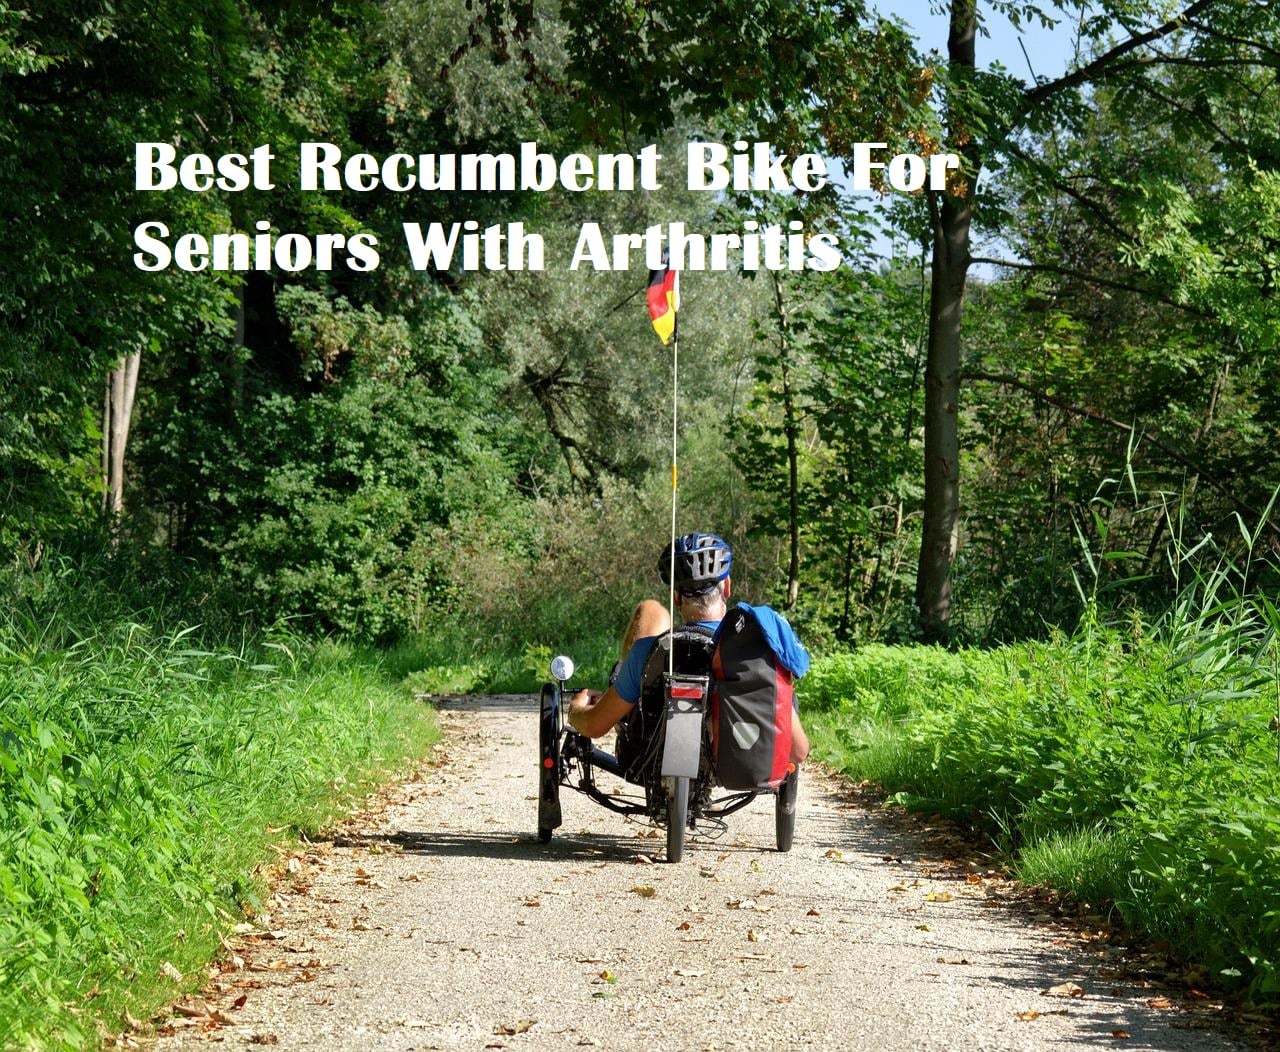 A person biking with the title Best Recumbent Bike For Seniors With Arthritis